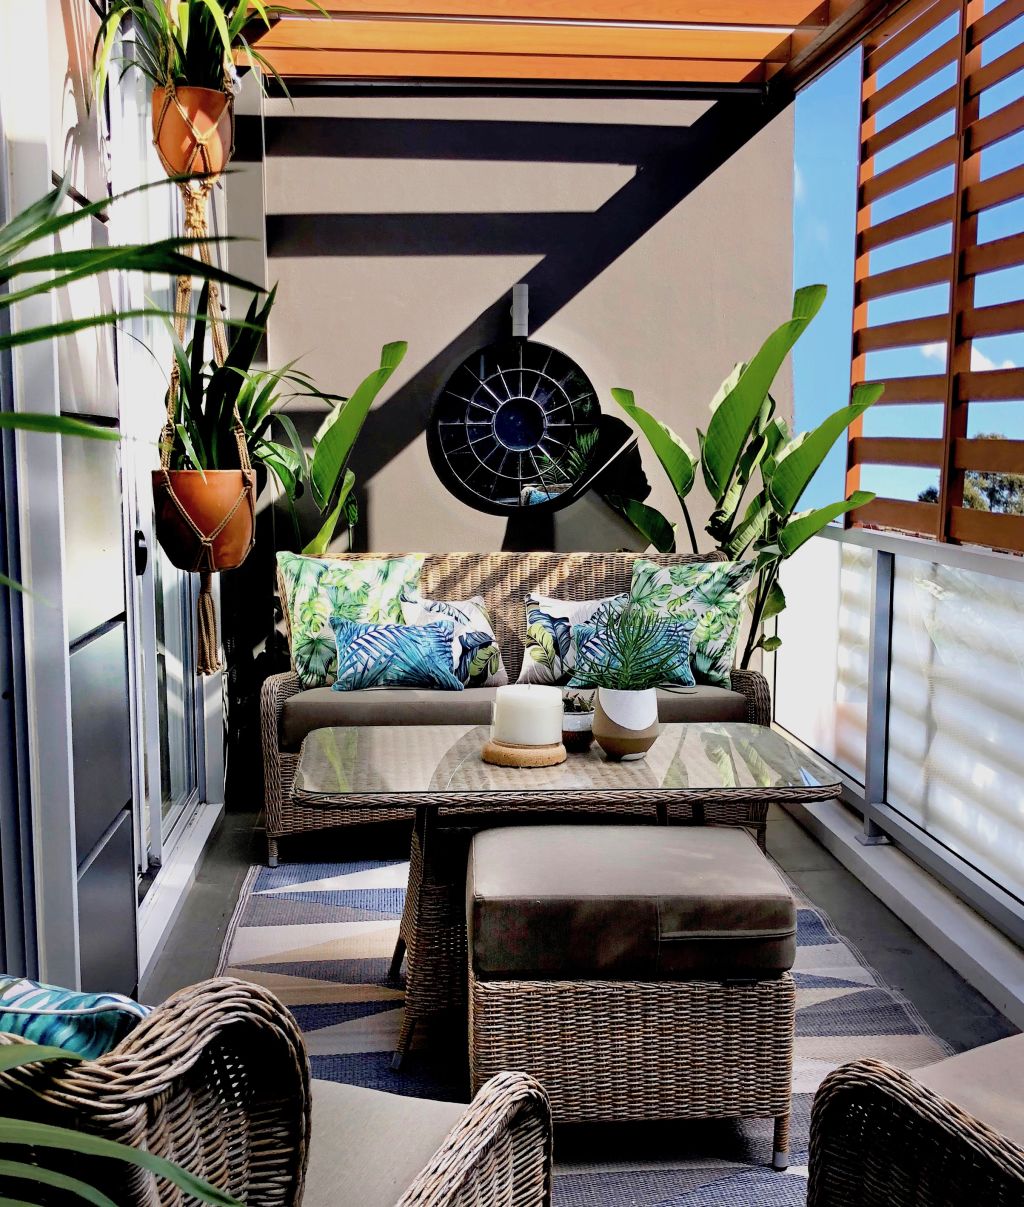 An outdoor room to relax at the end of the day. Photo: Terrace Outdoor Living